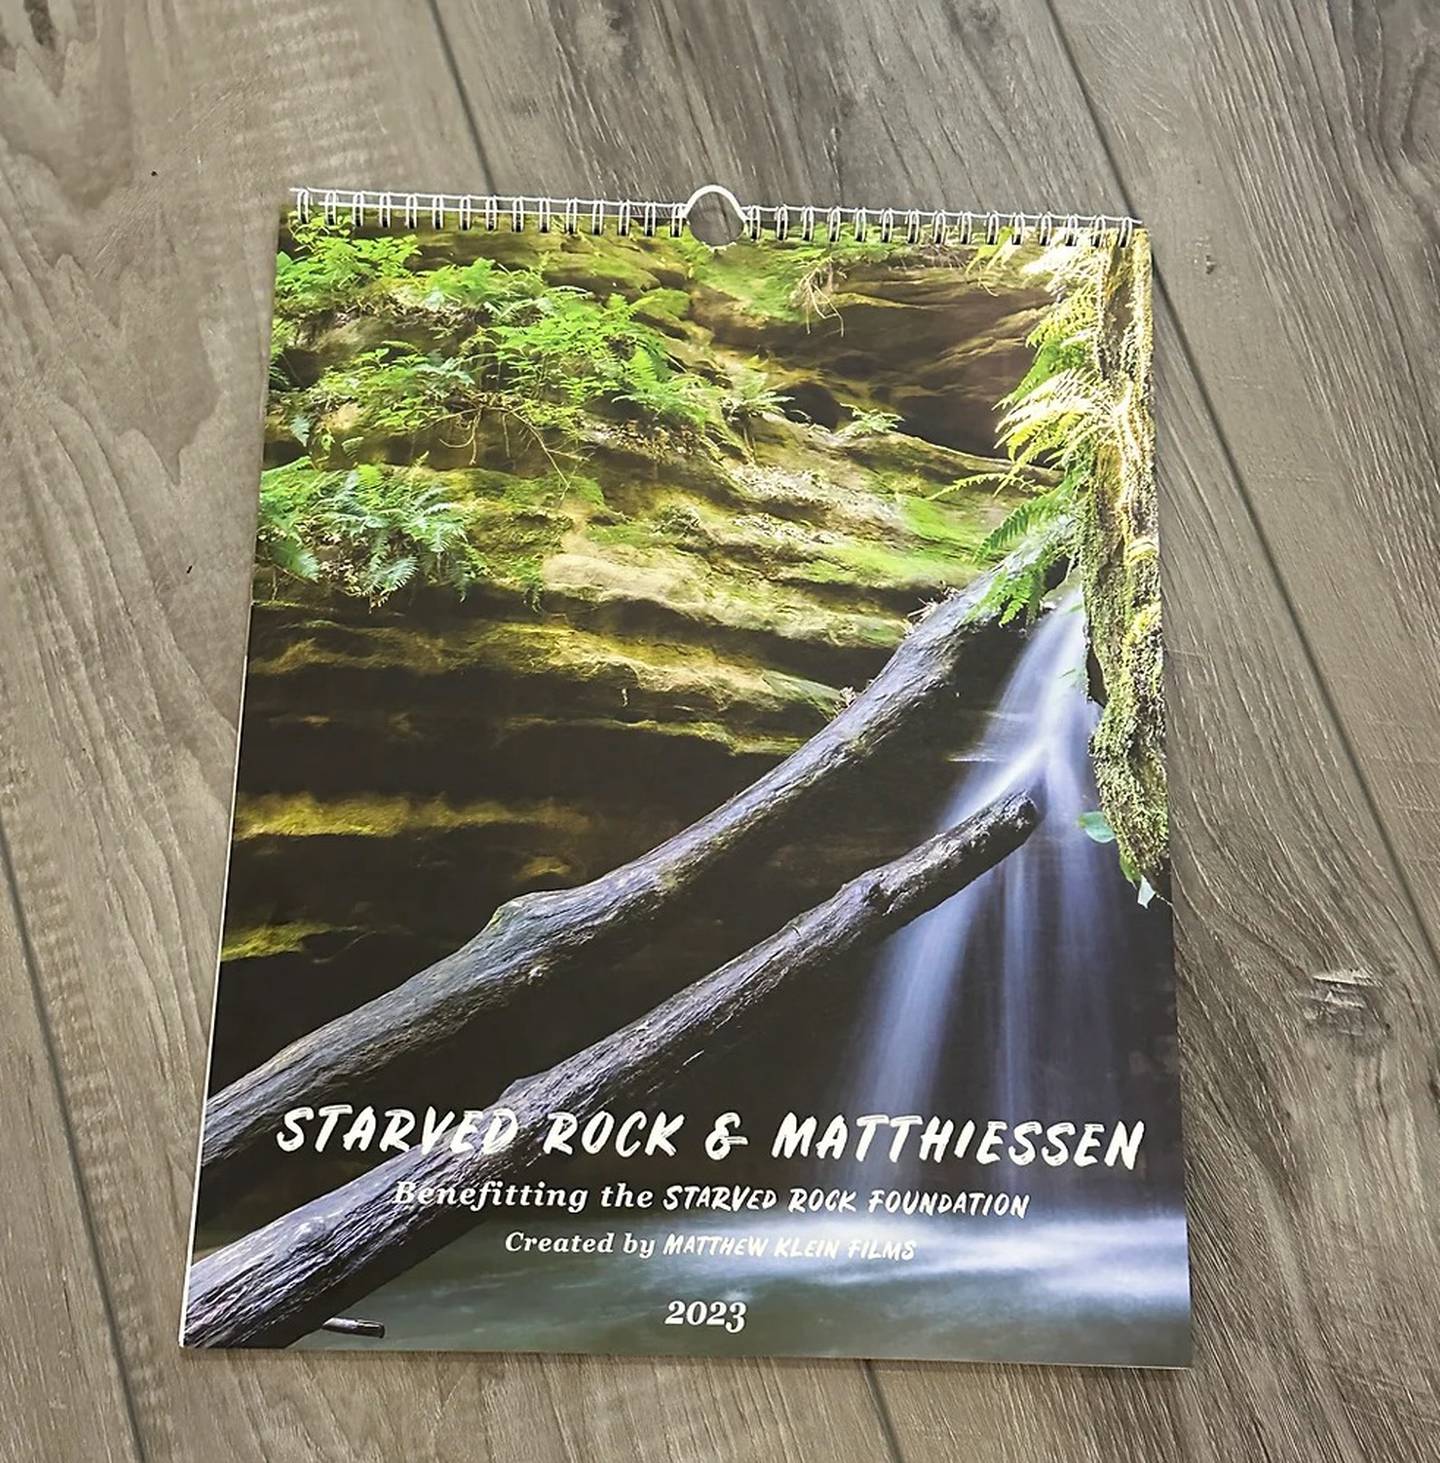 The Starved Rock calendars created by photographer and videographer Matthew Klein have returned, this time including federal holidays, park events and photos taken by local community members.